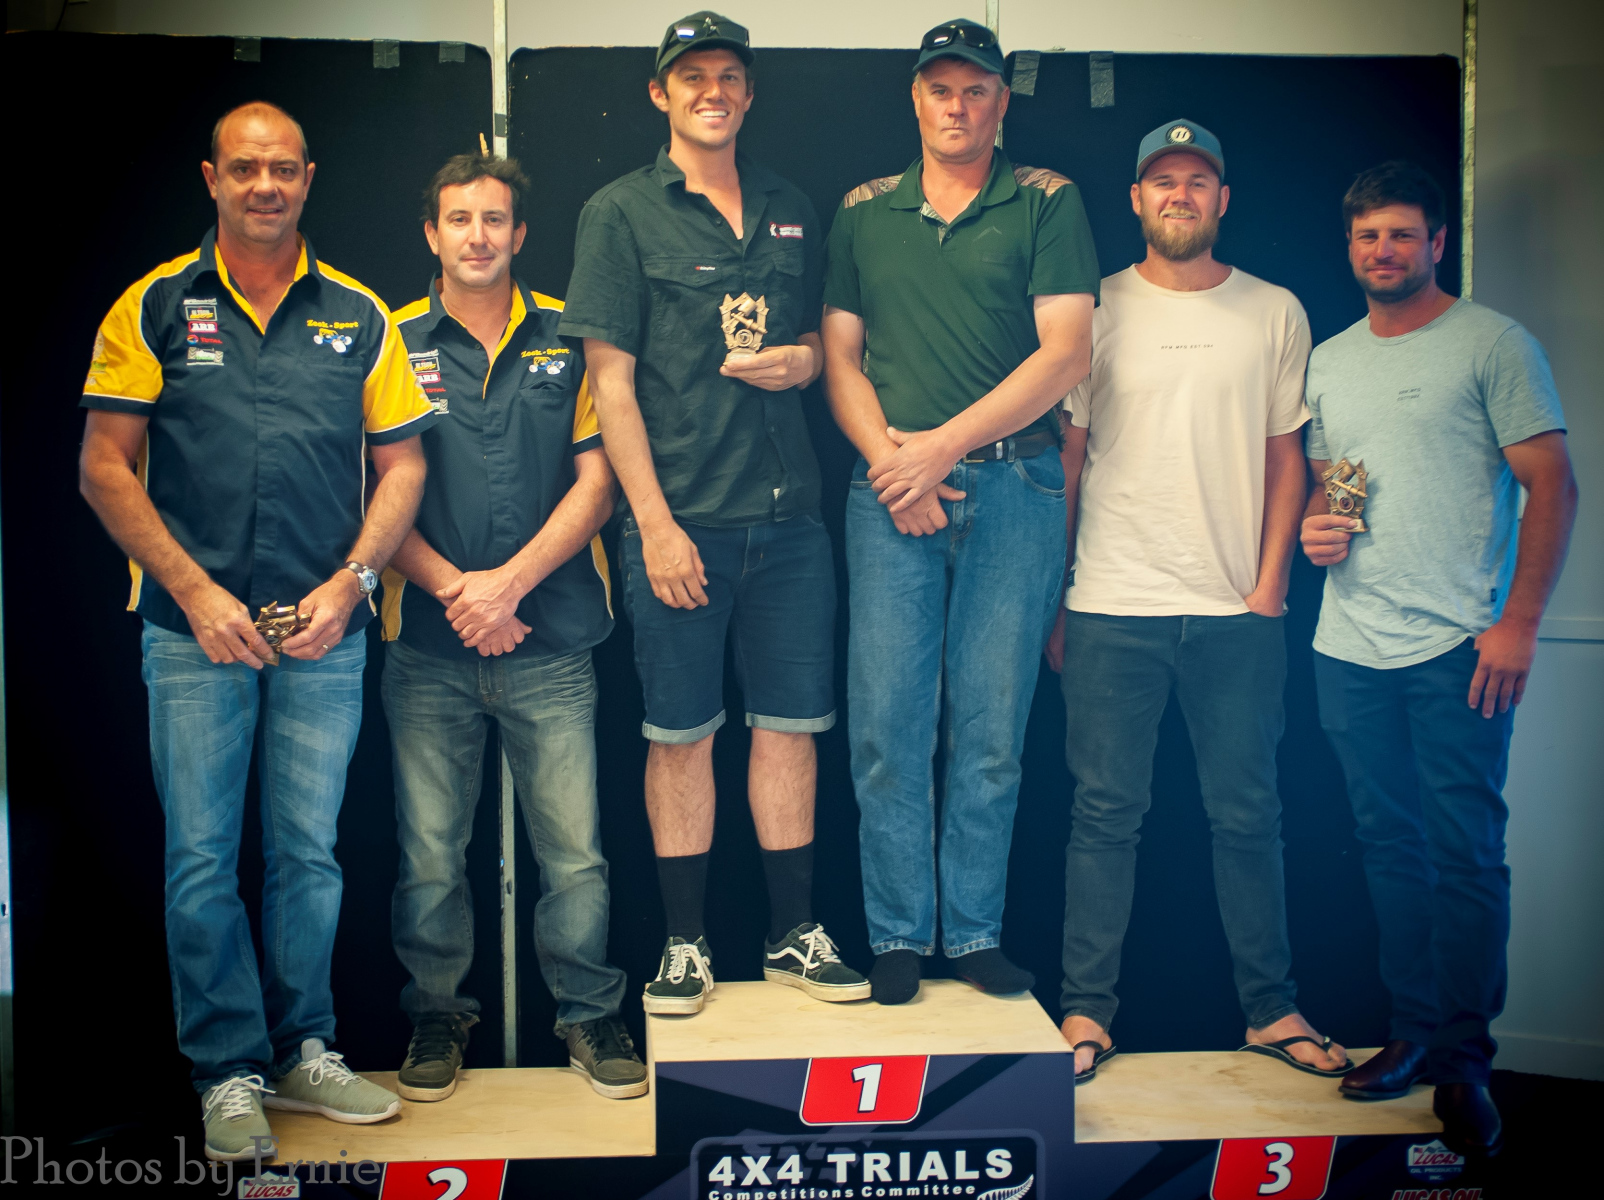 C Class - 2nd Nathan Fogden & Mike Gibbons, 1st Mitchell Caldow & Marcus Thomsen, 3rd Joel Hobart & Michael McGiven